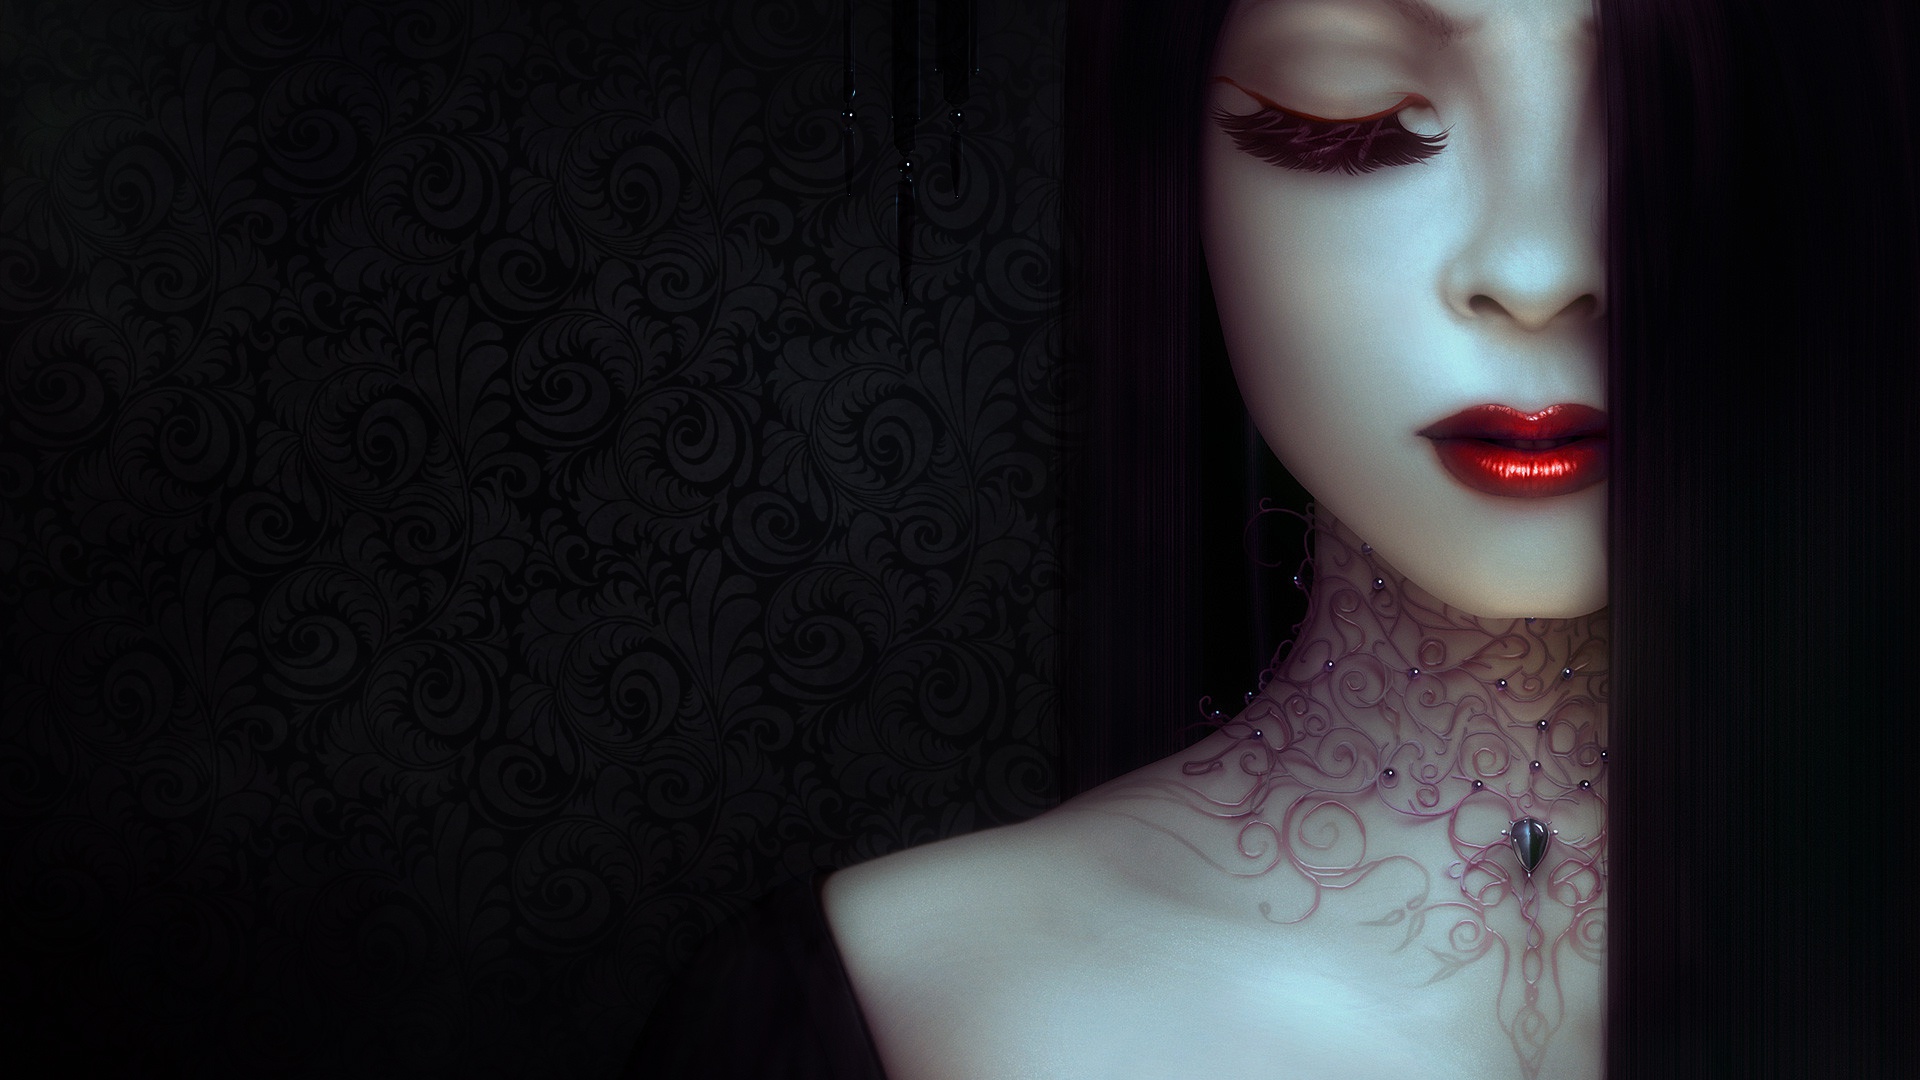 General 1920x1080 women face red lipstick artwork simple background closed eyes fantasy girl